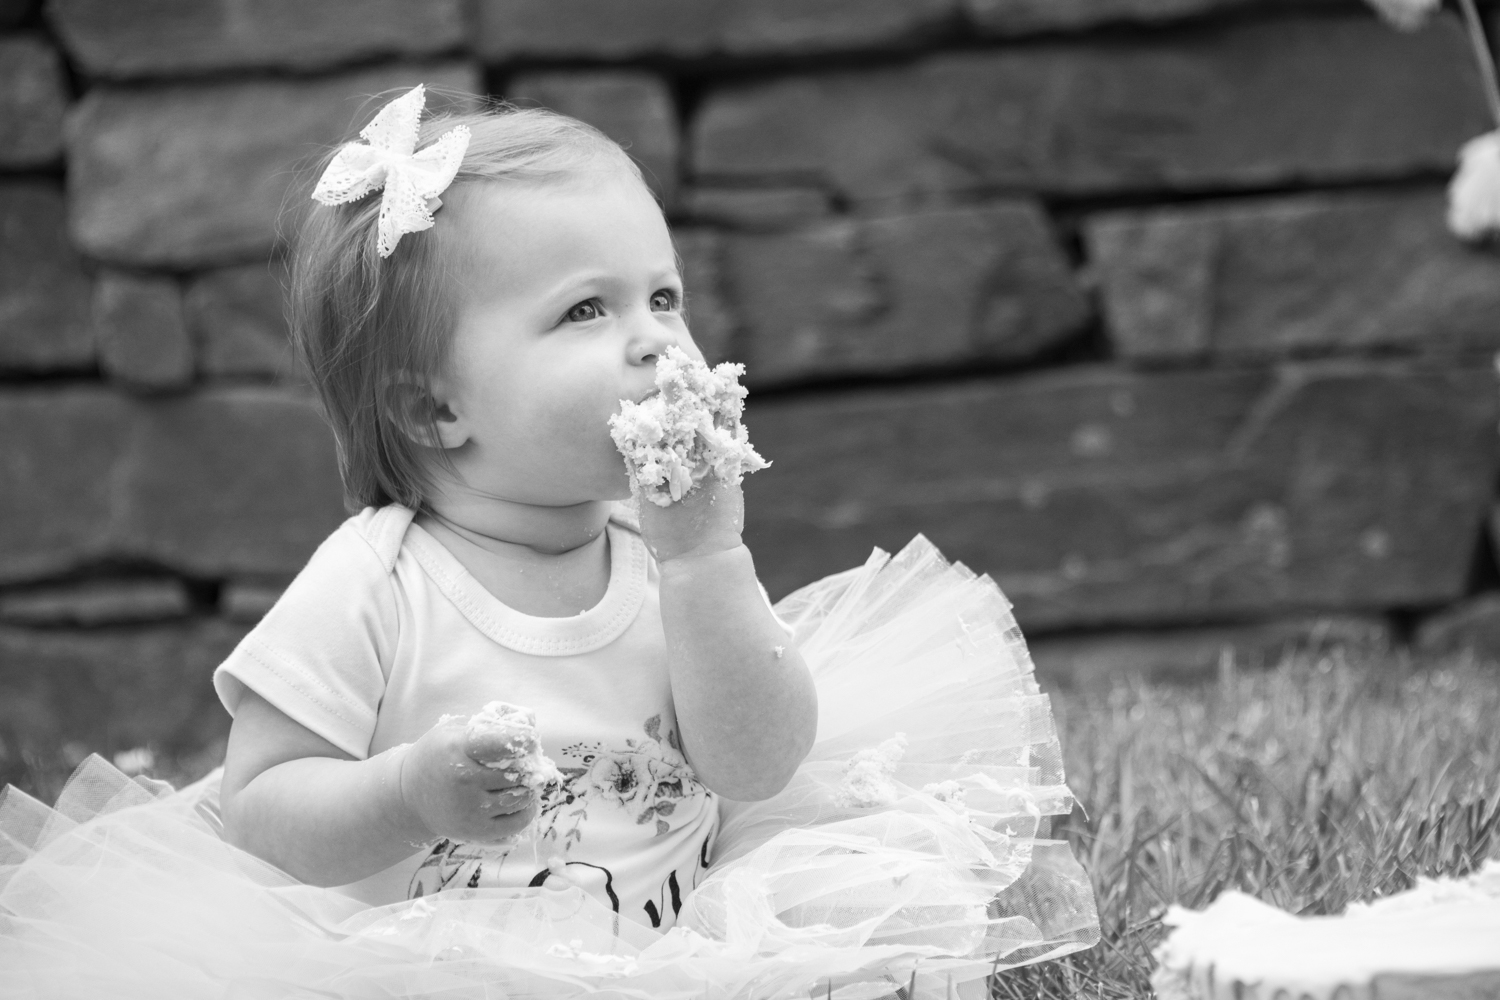 One year old girl eating cake in a tutu